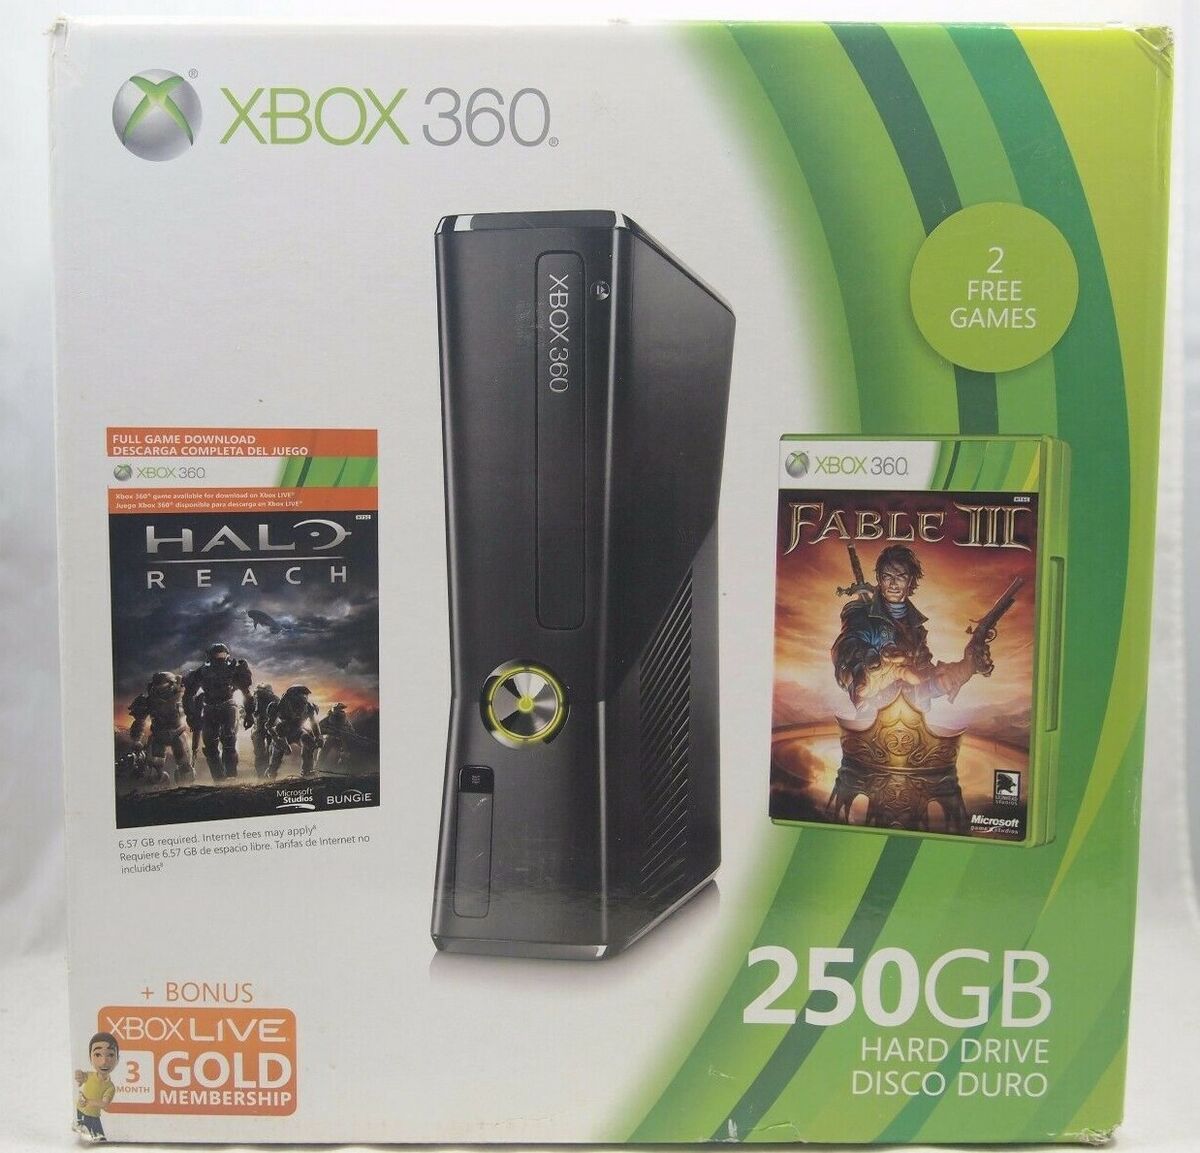 Empty box for 360 250GB Halo Reach/ Fable III 3 Authentic | eBay